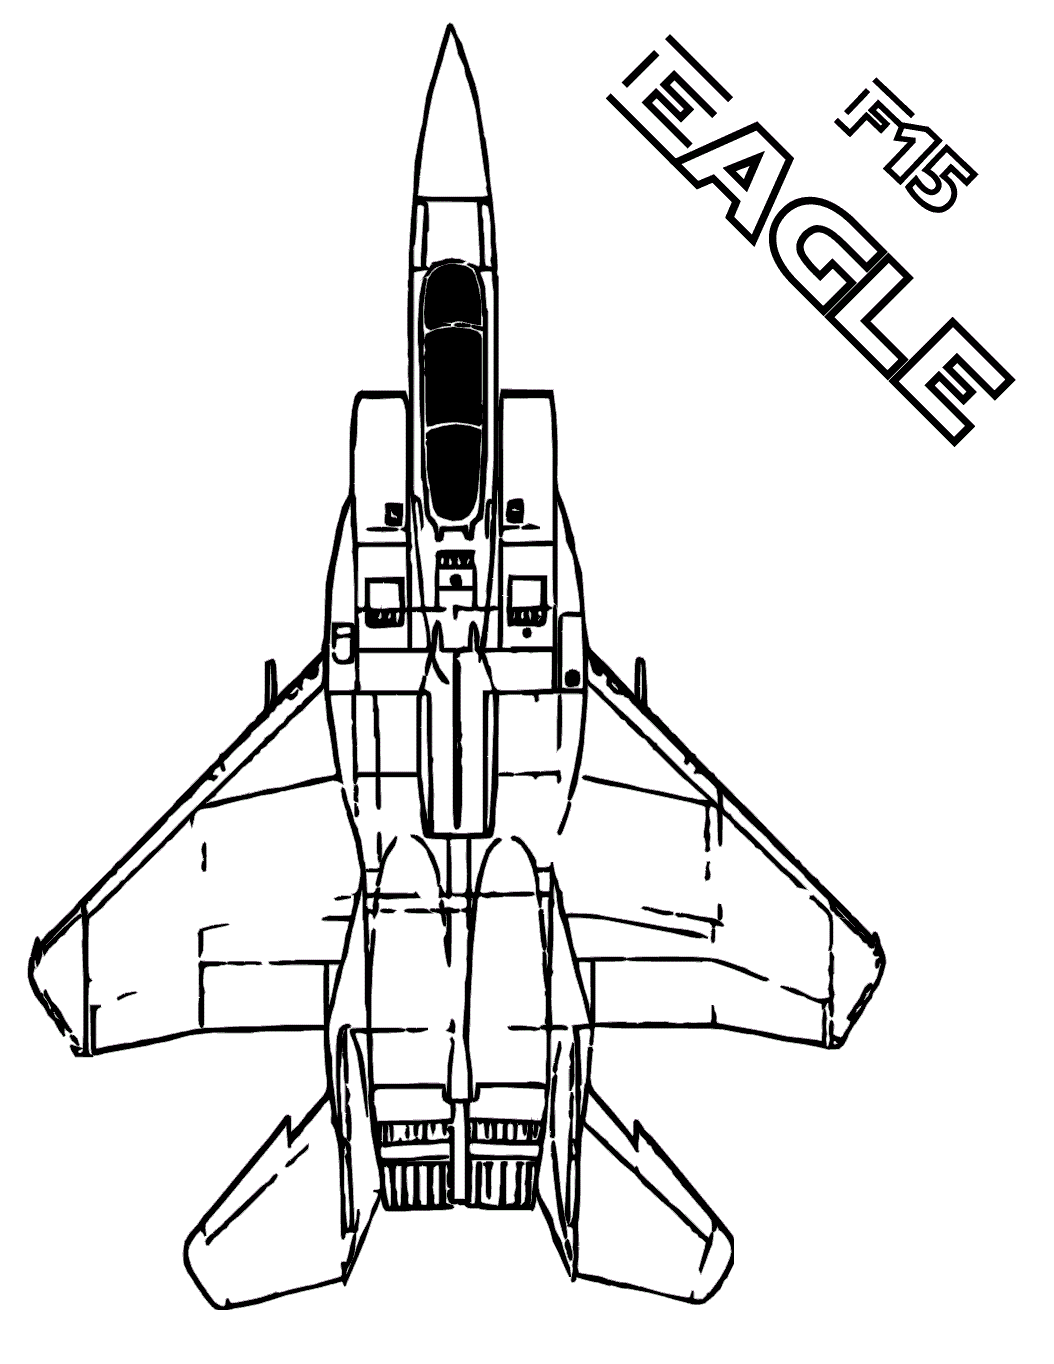 Printable Air Force Coloring Pages Pdf For Kids - Air Force Coloring Pages to Print